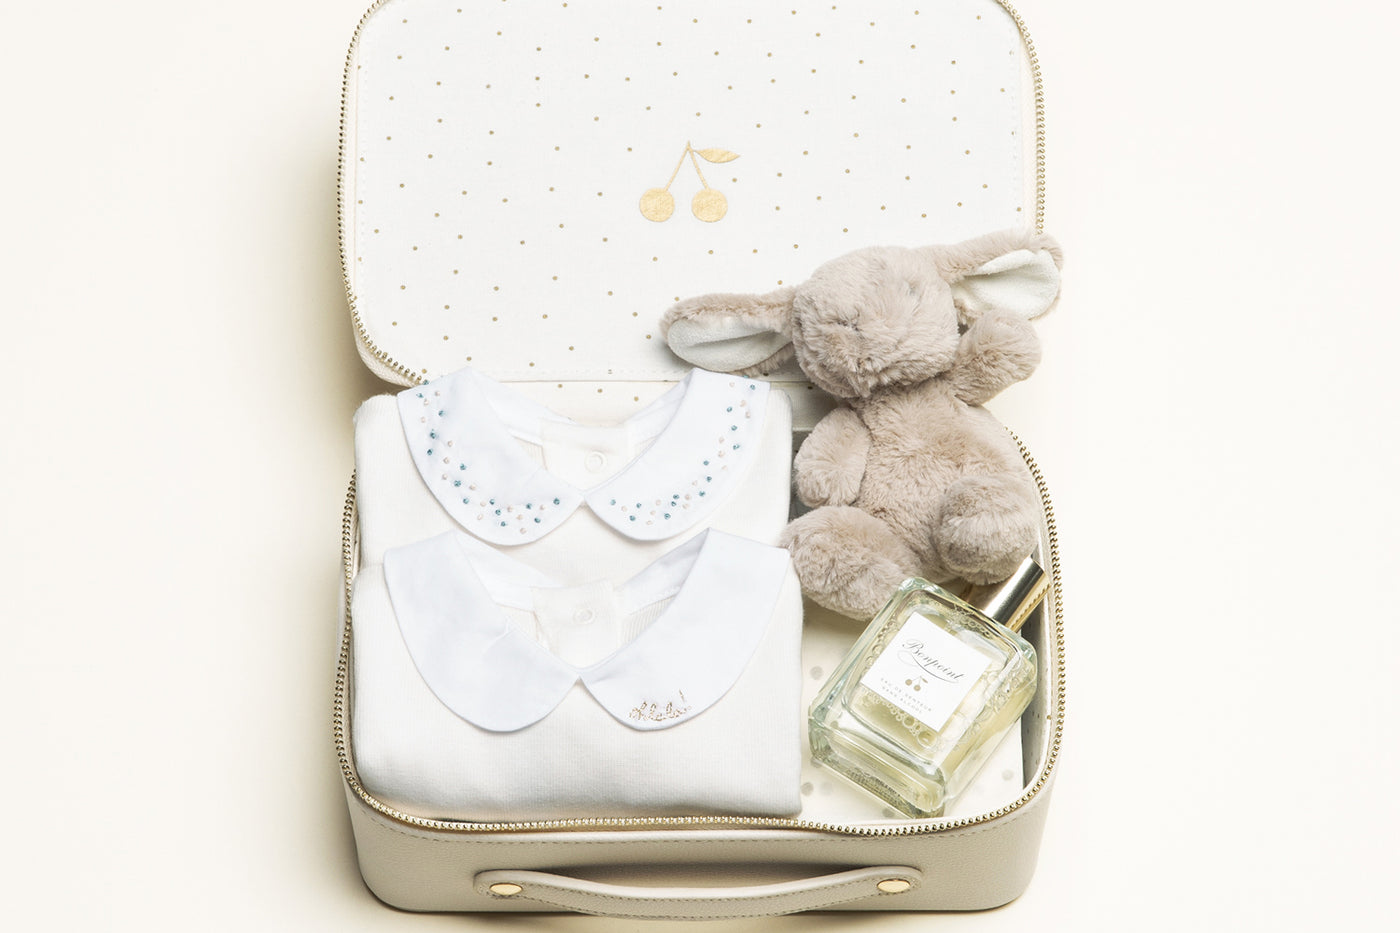 Small bodysuits case with perfume